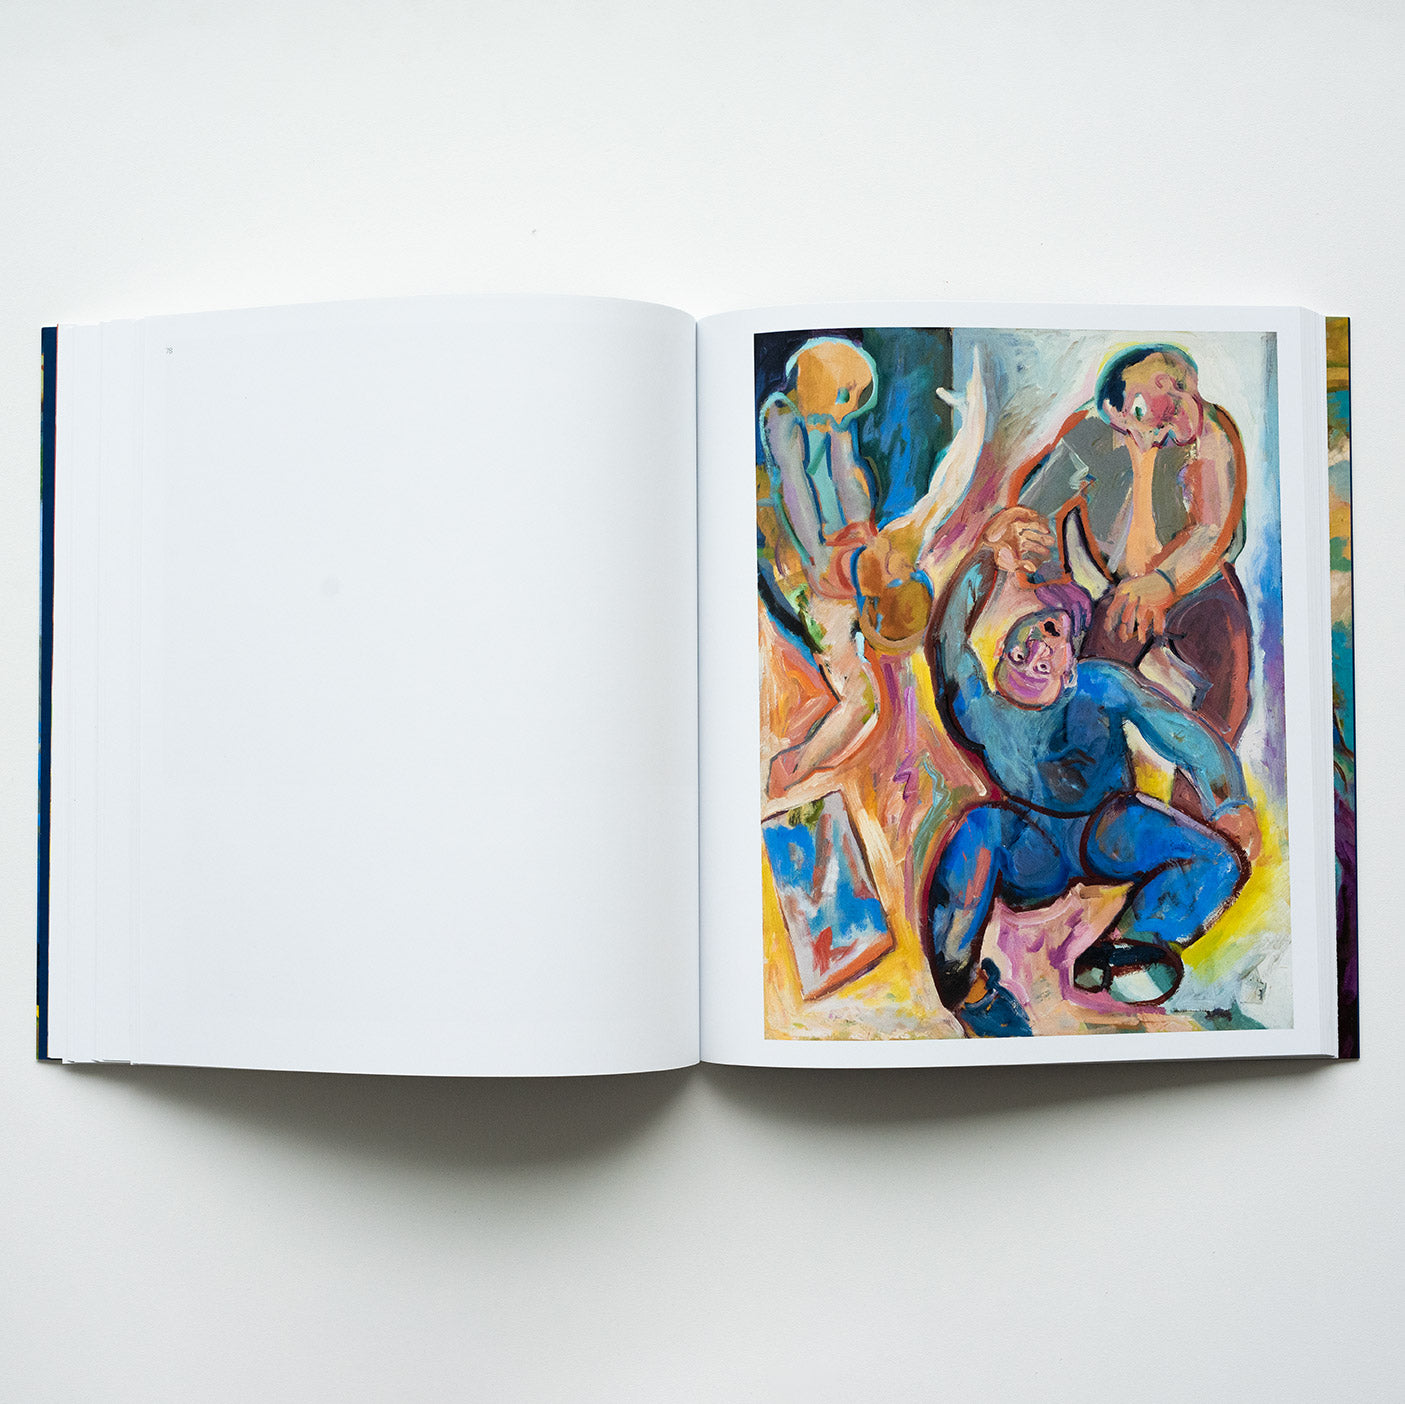 Inside pages of John Lyons catalogue featuring a vibrant painting by the artist.